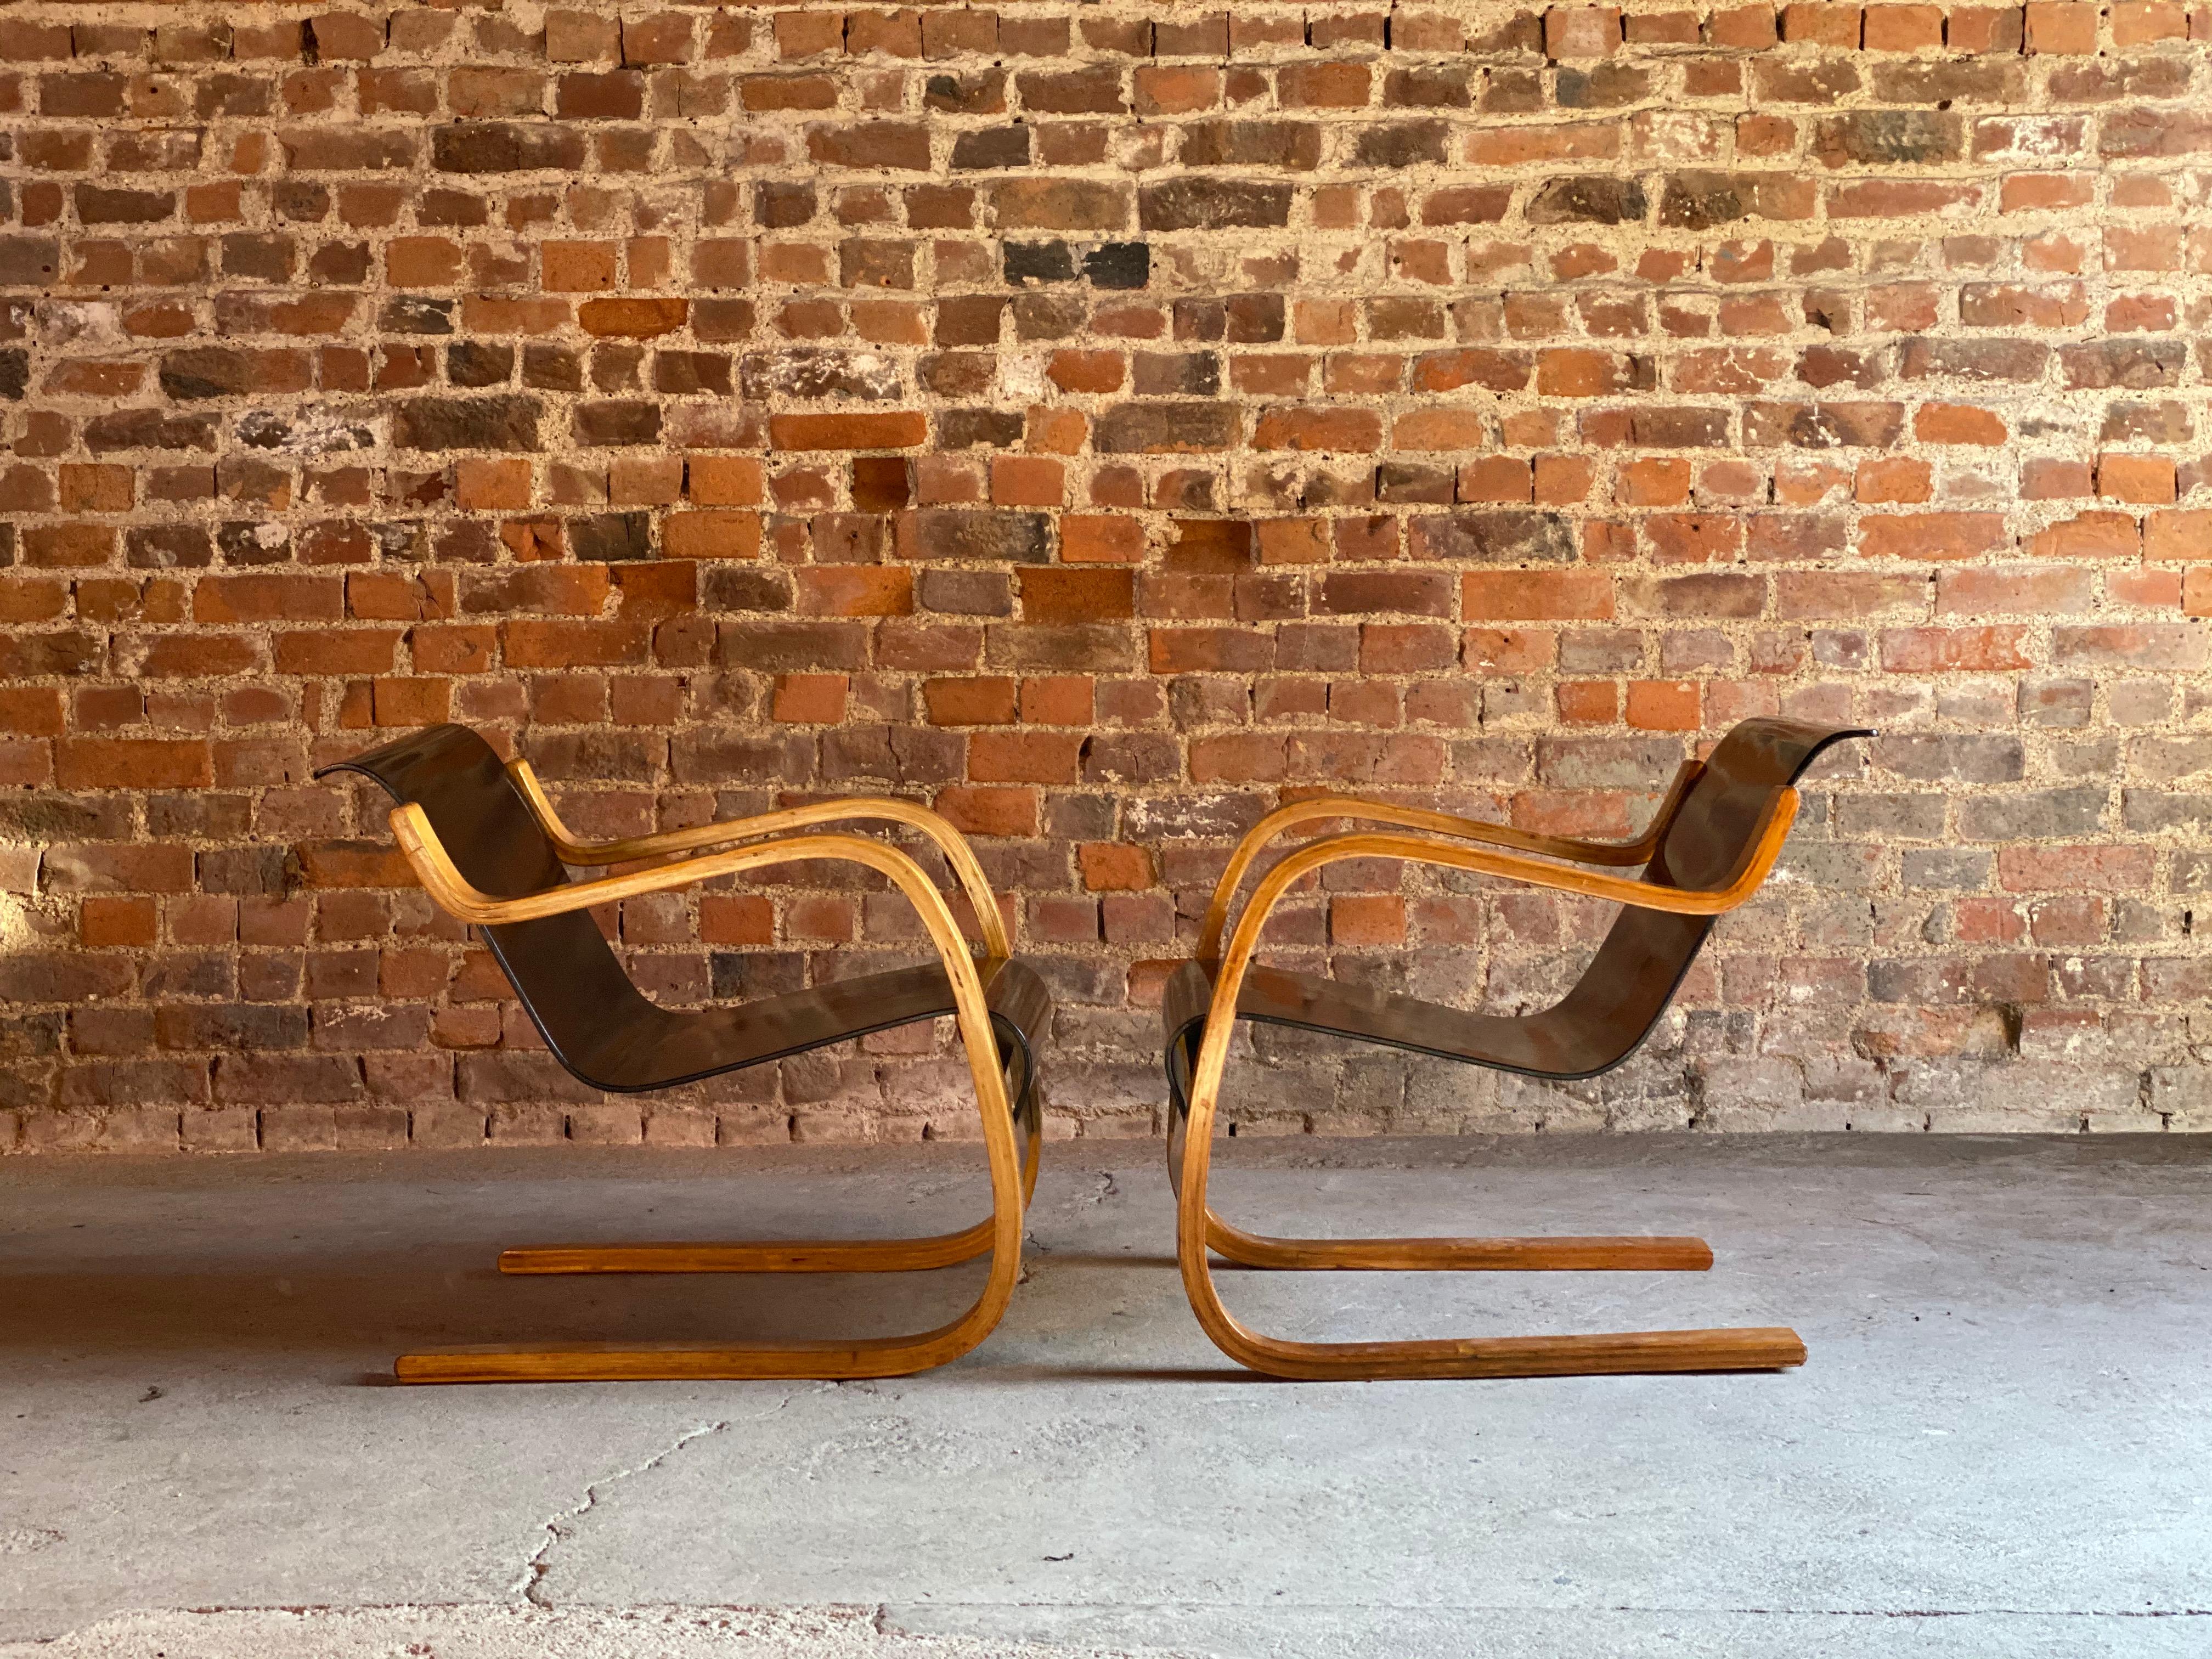 Rare pair of Alvar Aalto Model 31 armchairs for Finmar, Finland, circa 1930s 

Alvar Aalto pair of Model 31 laminated birch and plywood cantilever armchairs circa 1930s, with blackened seat and back. Designed by Alvar Aalto for Finmar. with